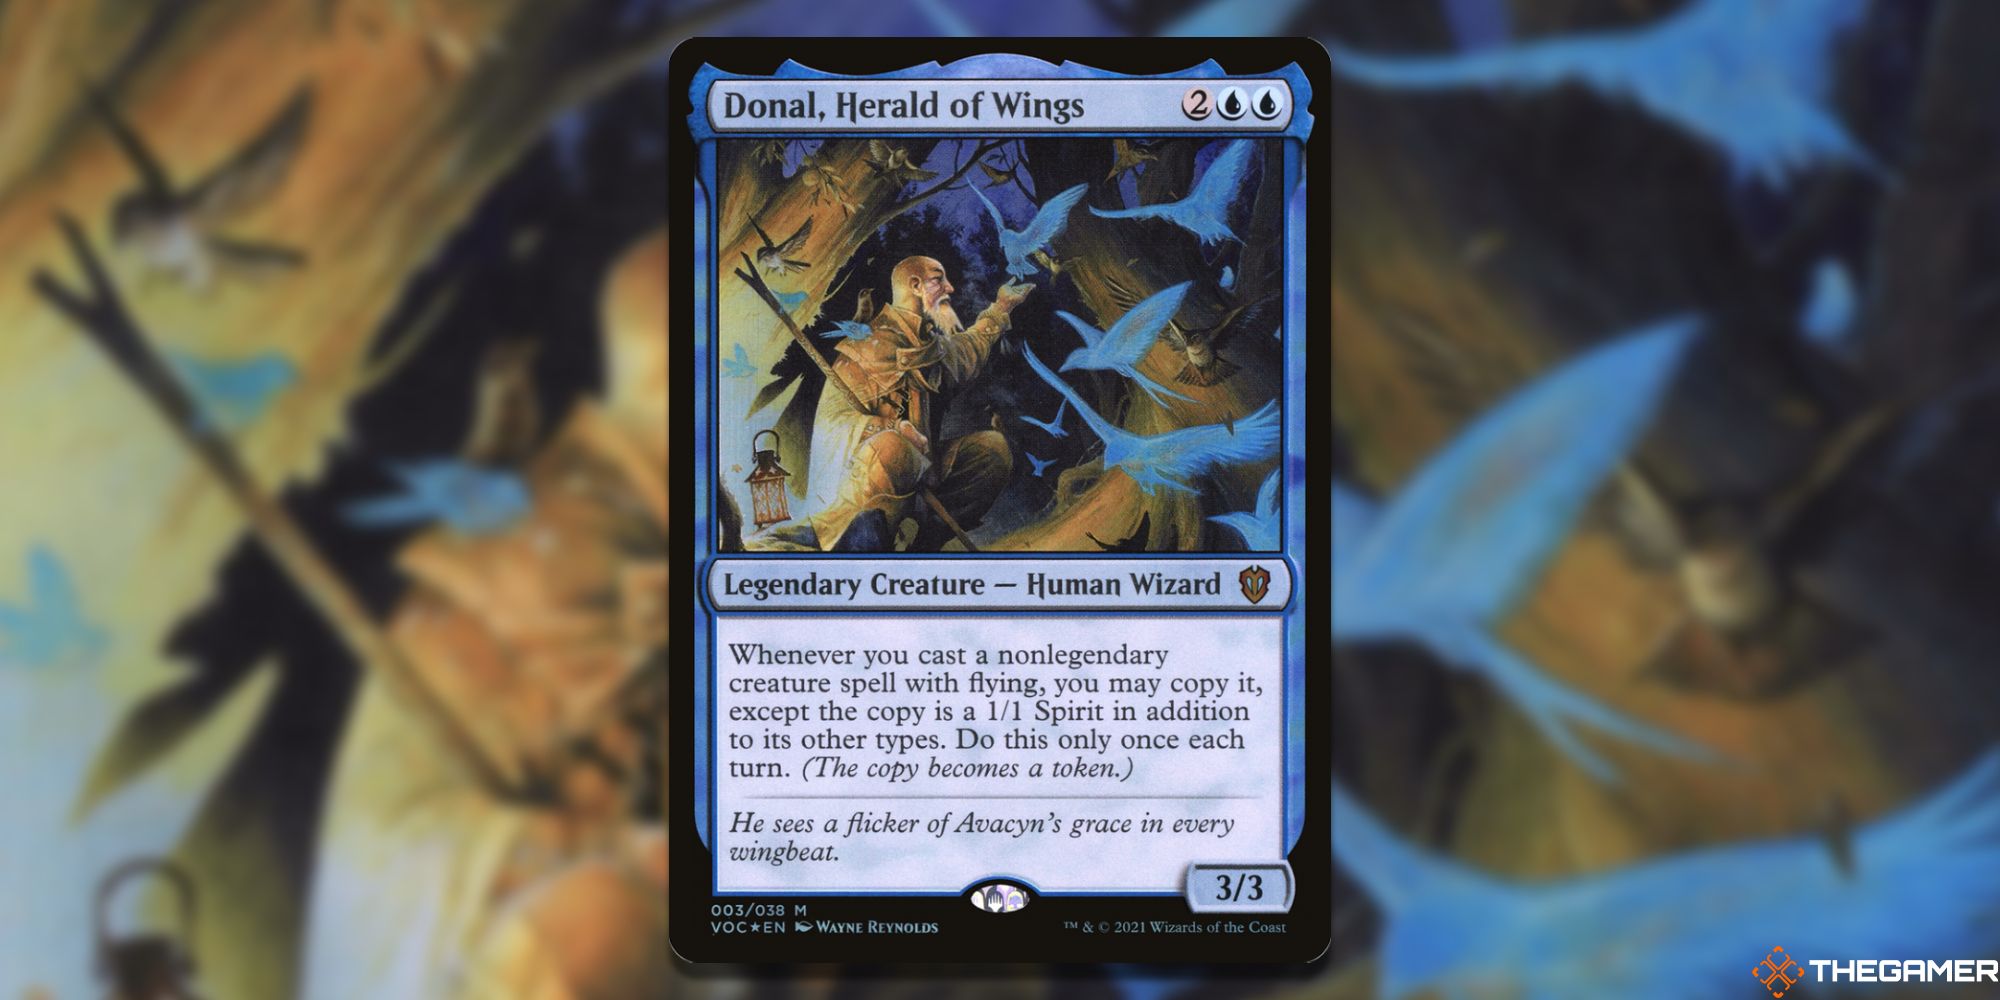 Donal, Herald of Wings card image in Magic: The Gathering, with artwork by Wayne Reynolds